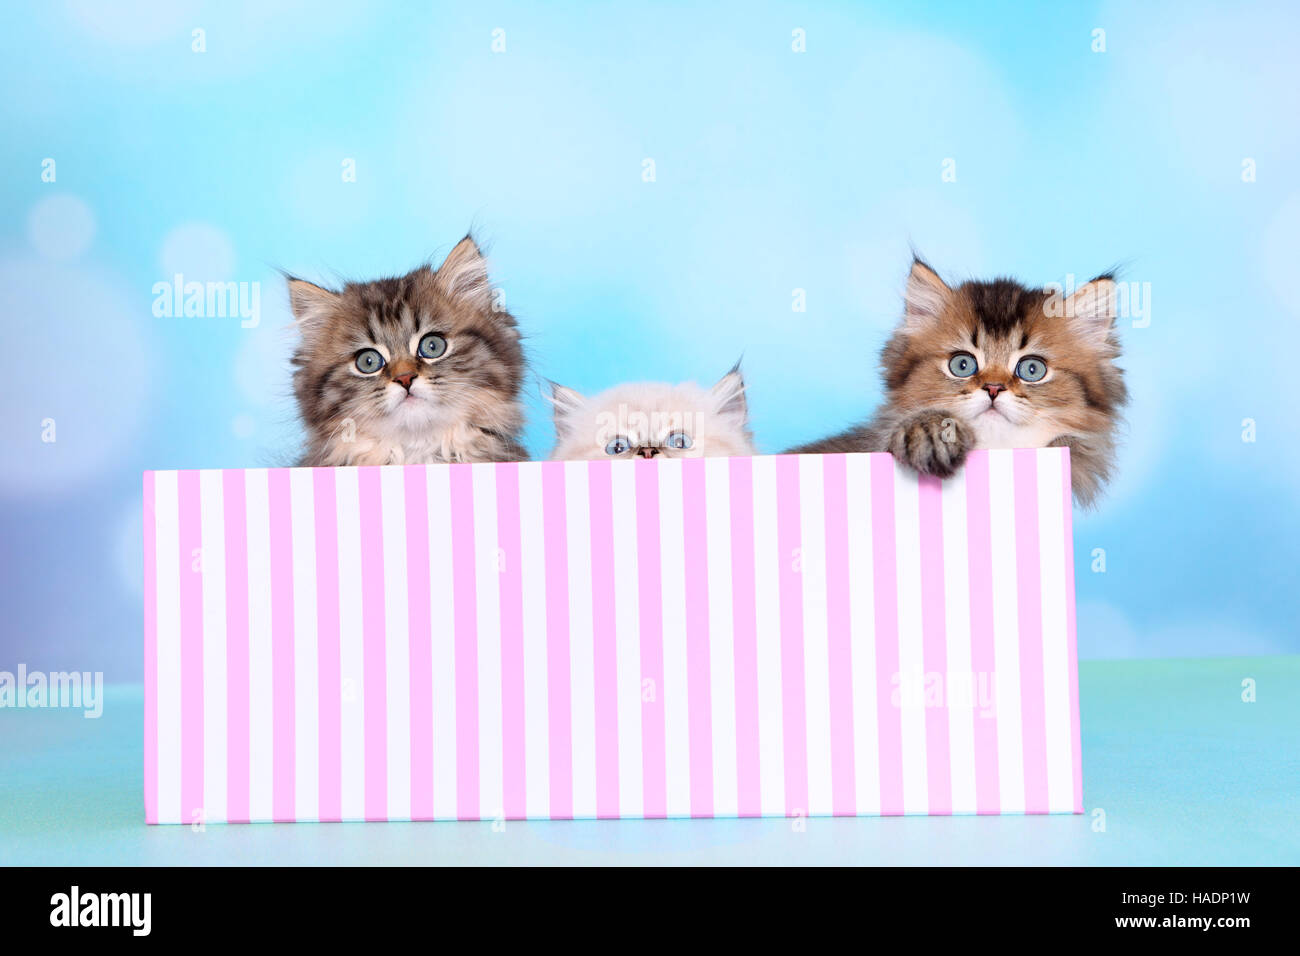 British Longhair. Three kittens (8 weeks old) in a pink-and-white striped box. Studio picture against a blue background Stock Photo